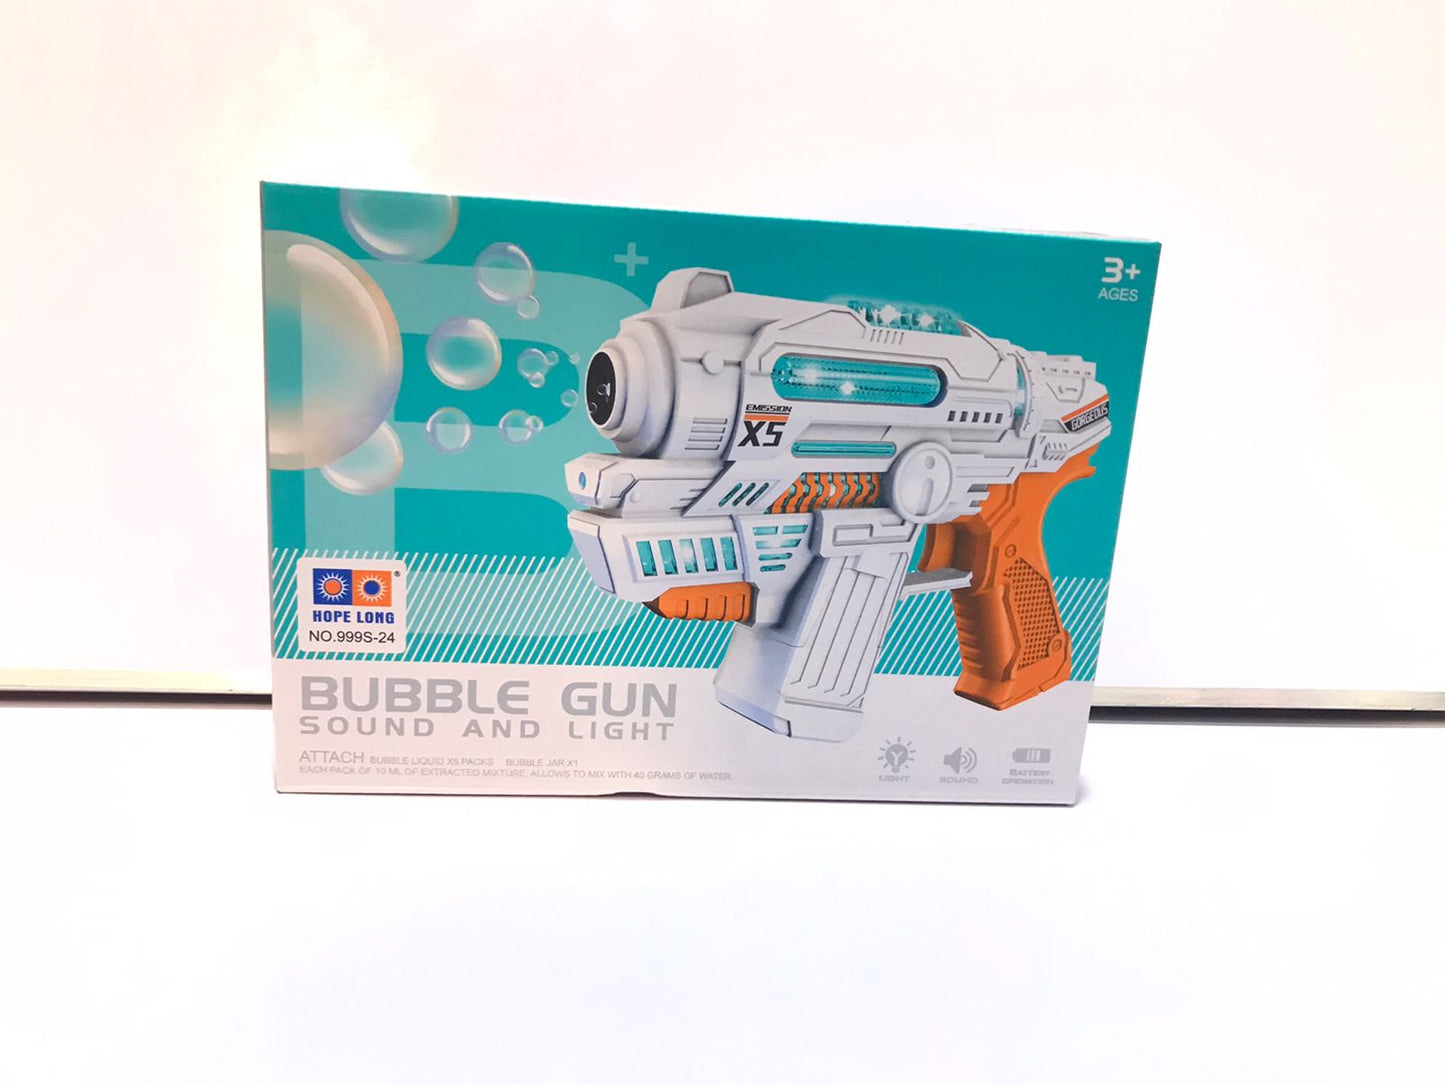 Bubble Gun With Sound And Light